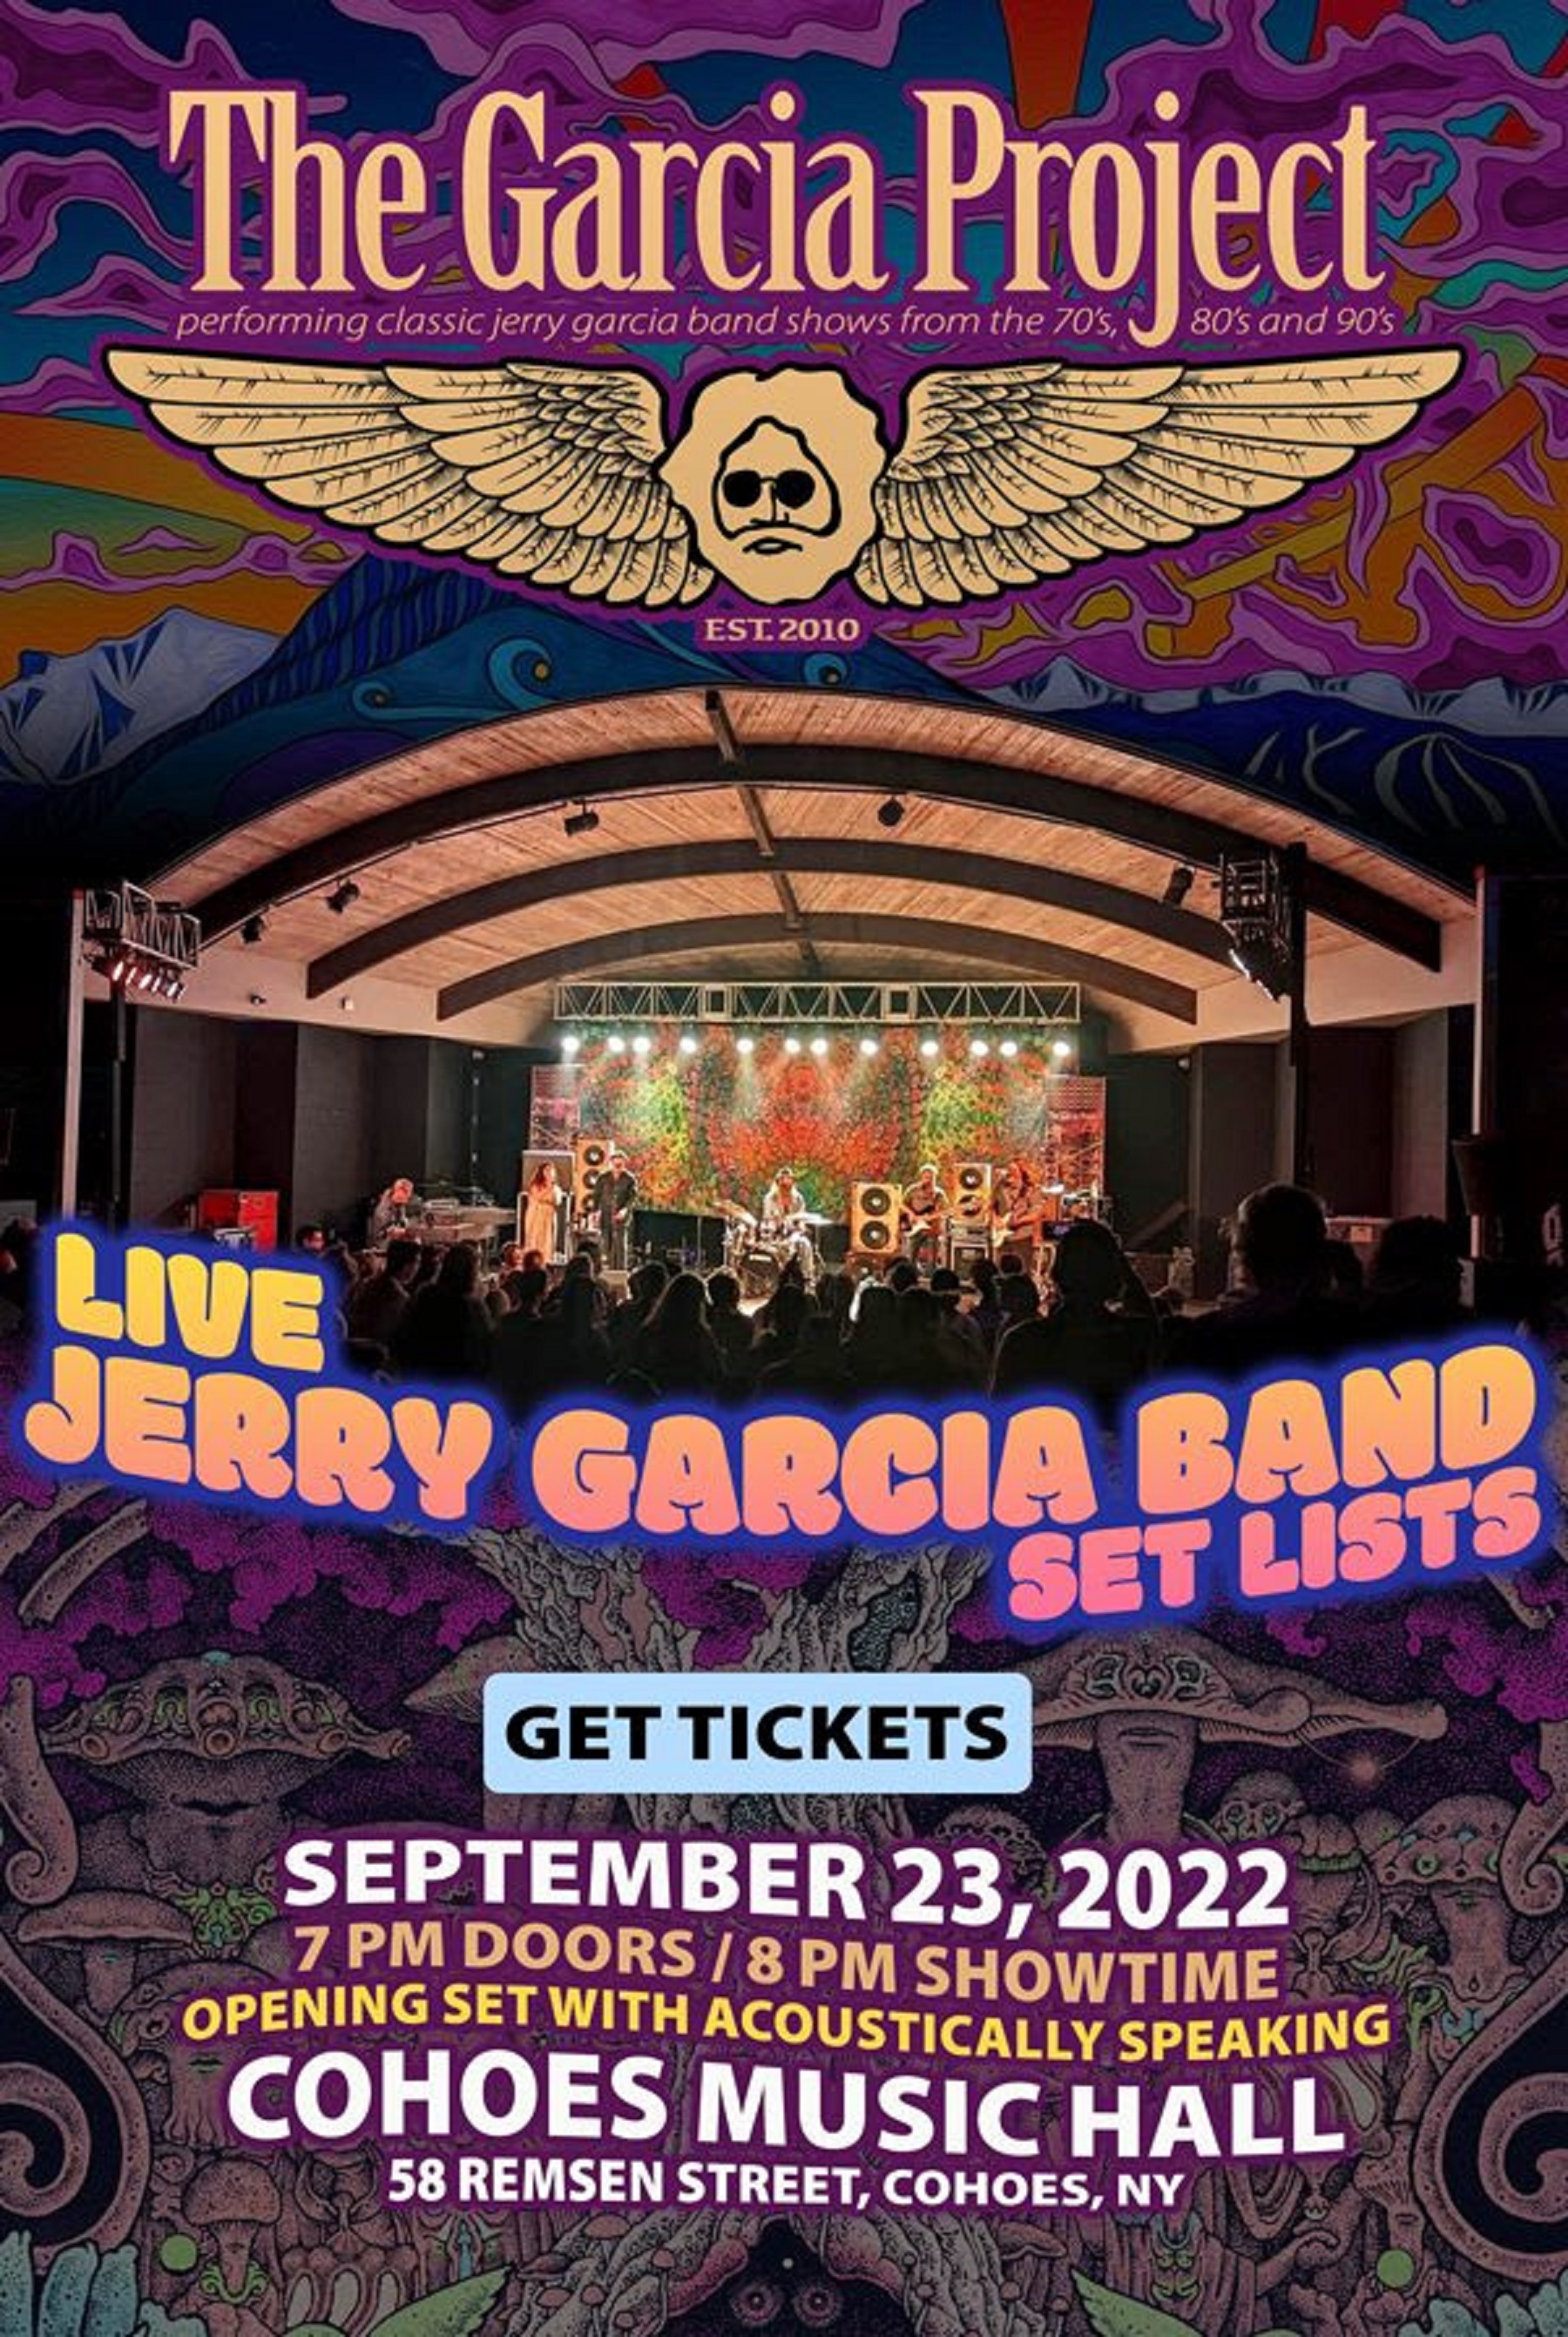 The Garcia Project returns “home to the 518” for a show at the beautiful Cohoes Music Hall on September 23, 2022